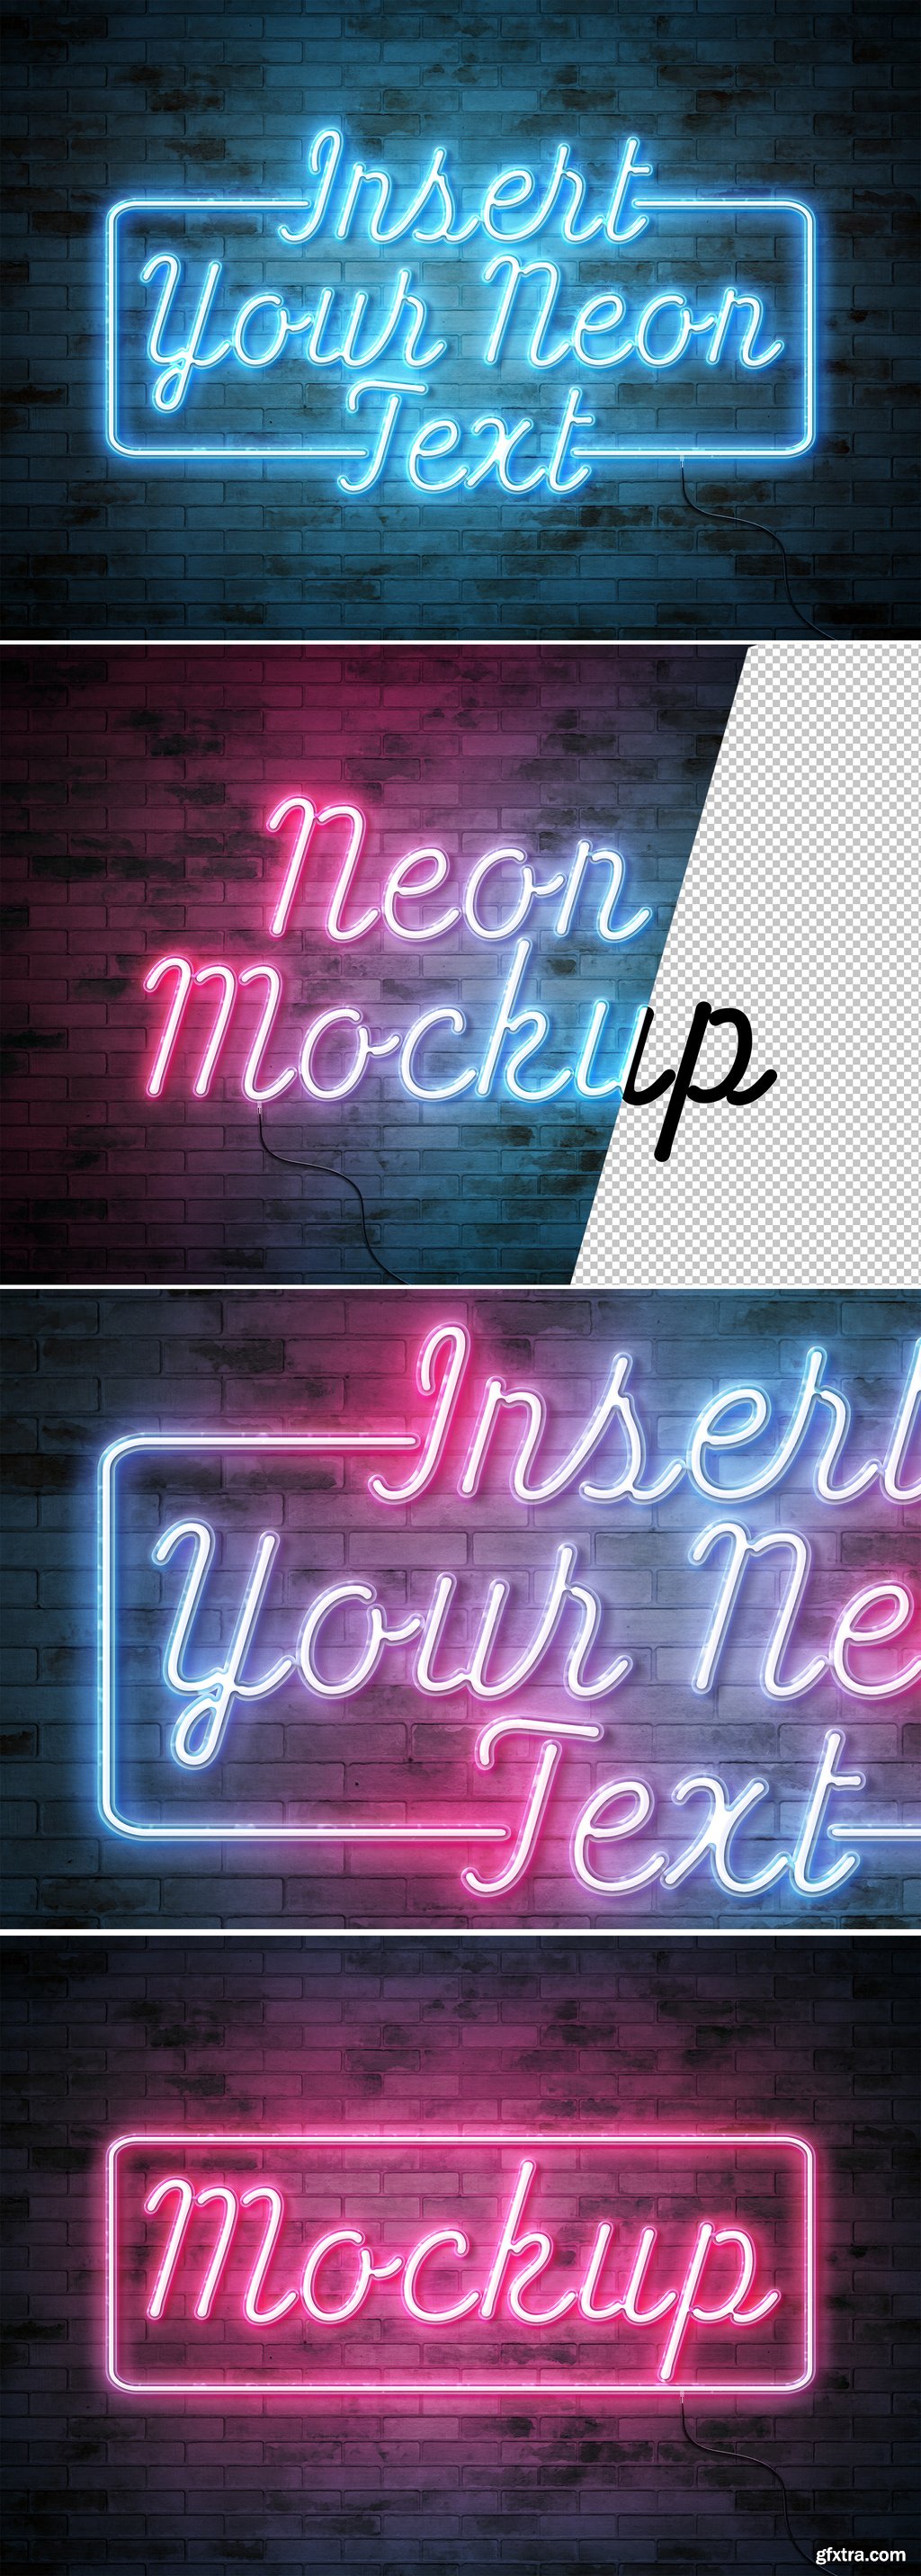 Neon Text Effect on Brick Wall with Wires Mockup 350350694 » GFxtra